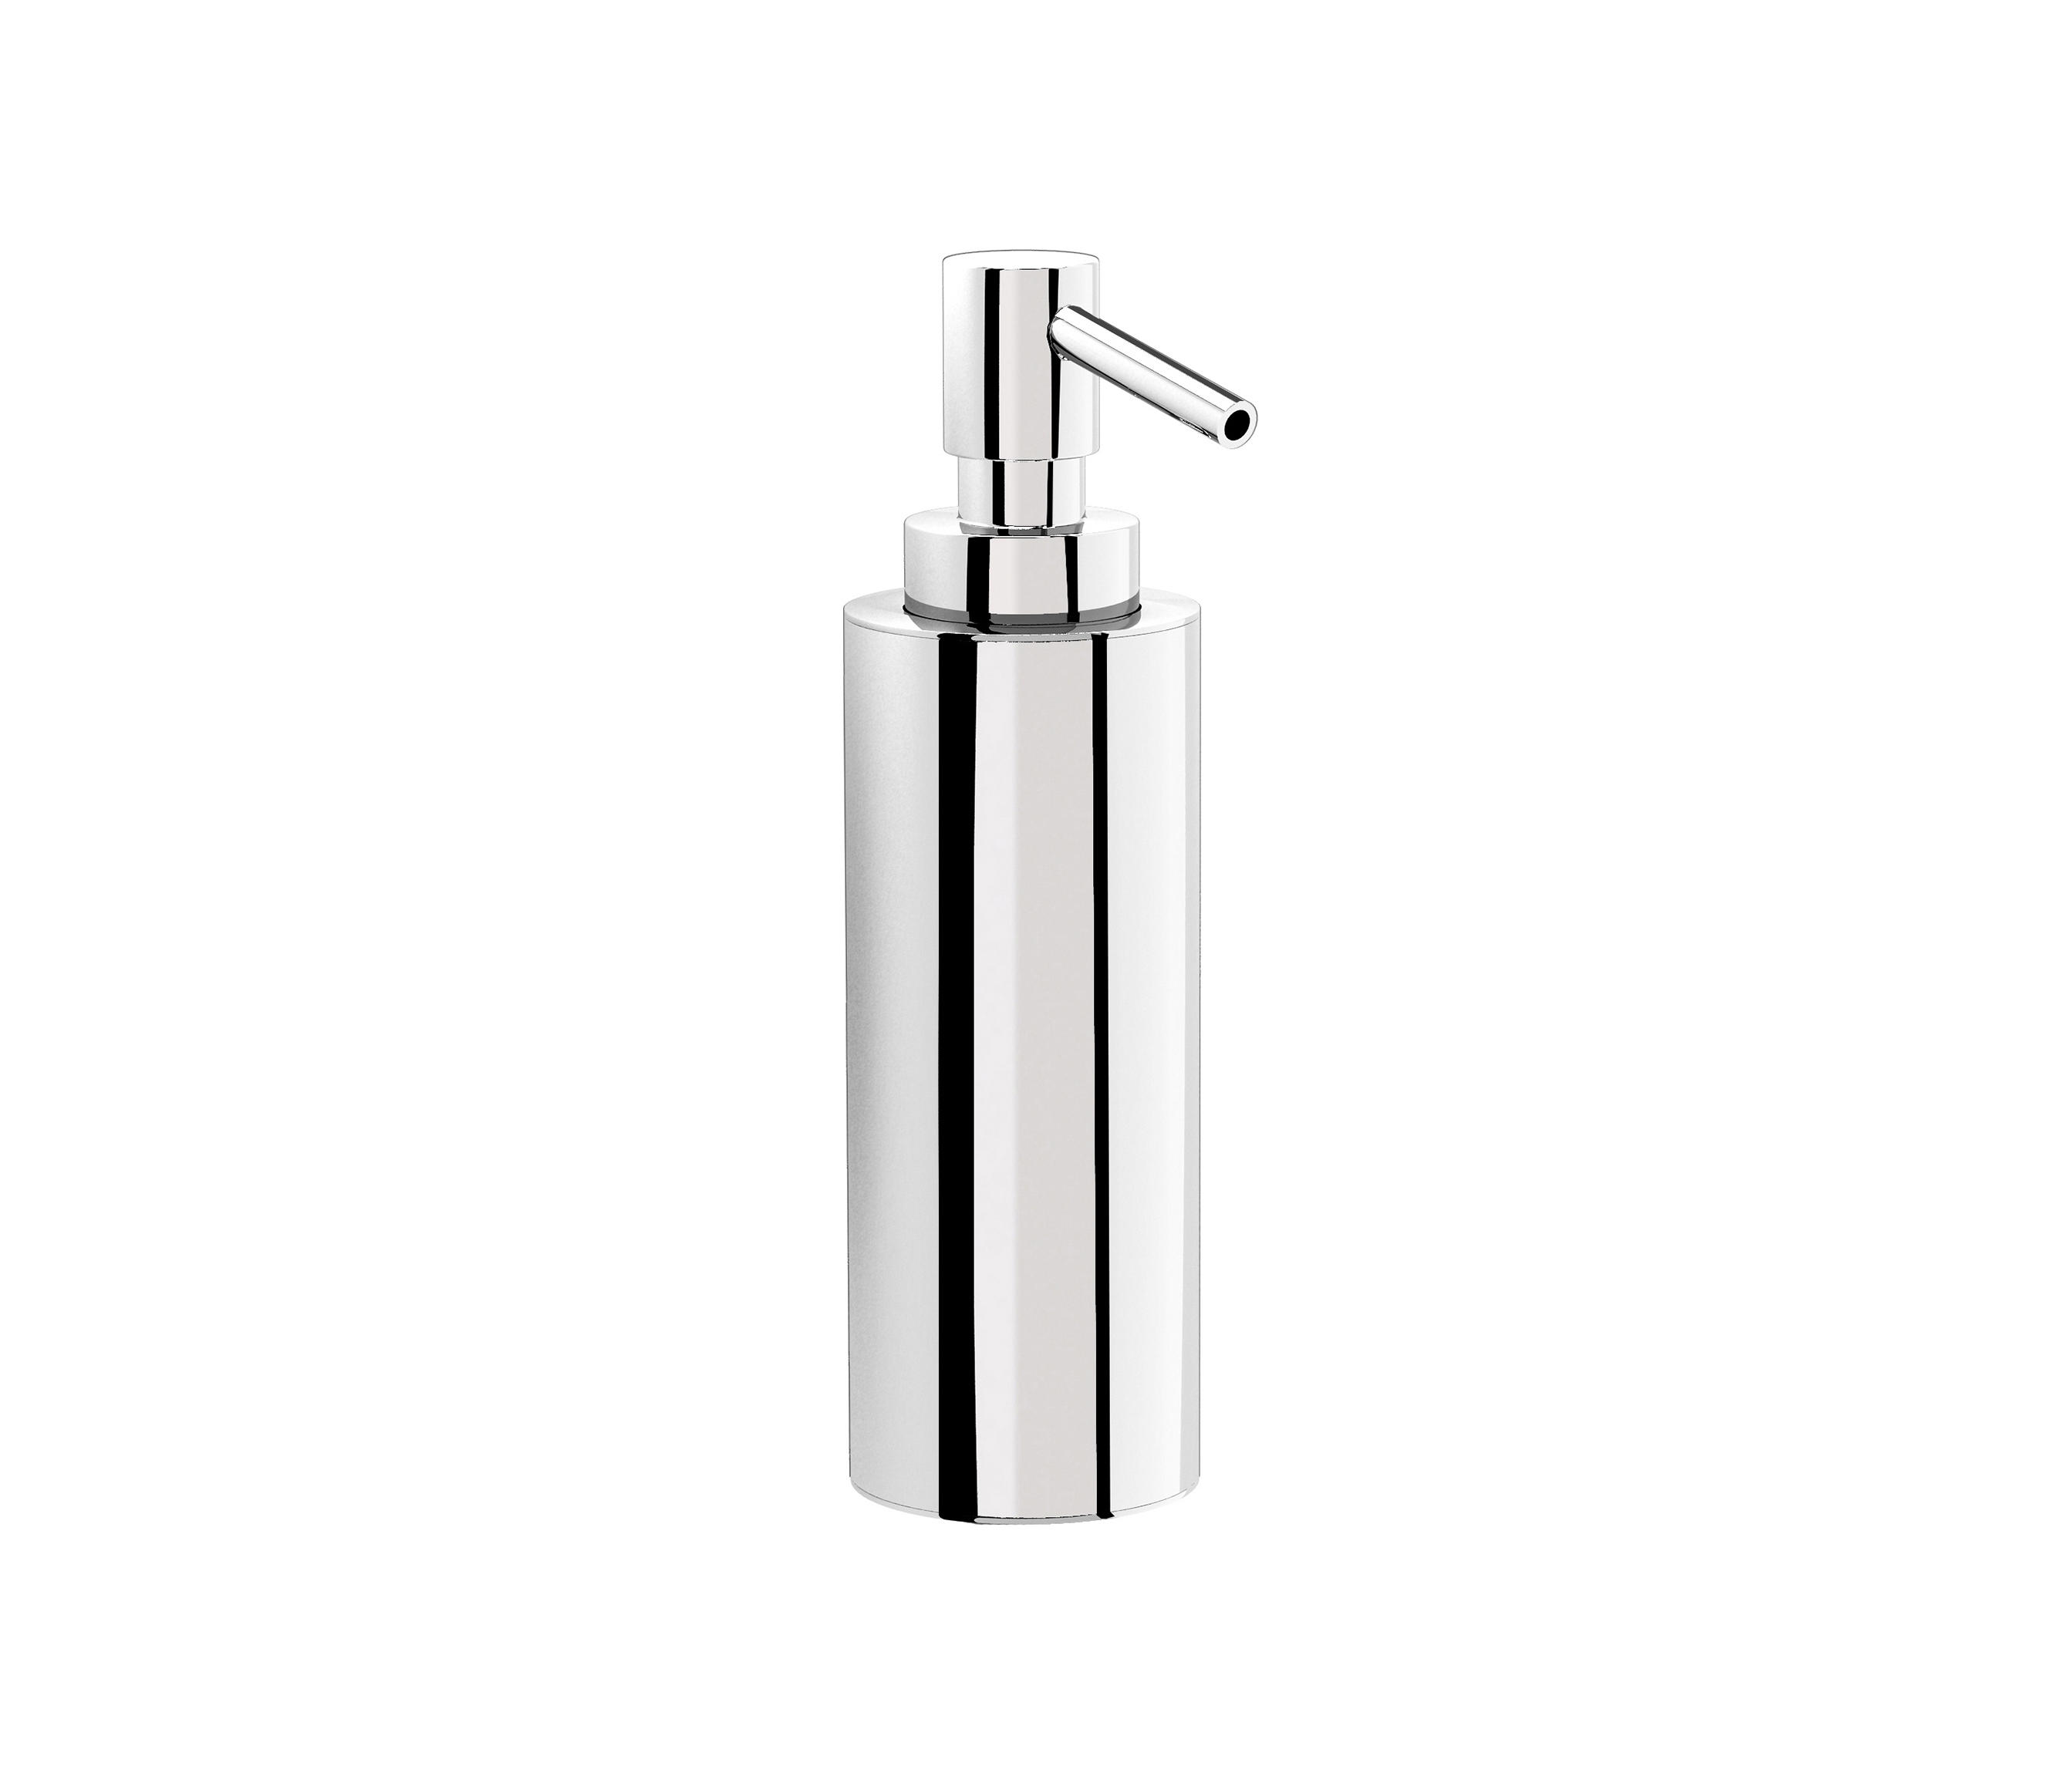 Chrome Wall Mounted Stainless Steel Modern Bathroom Accessories